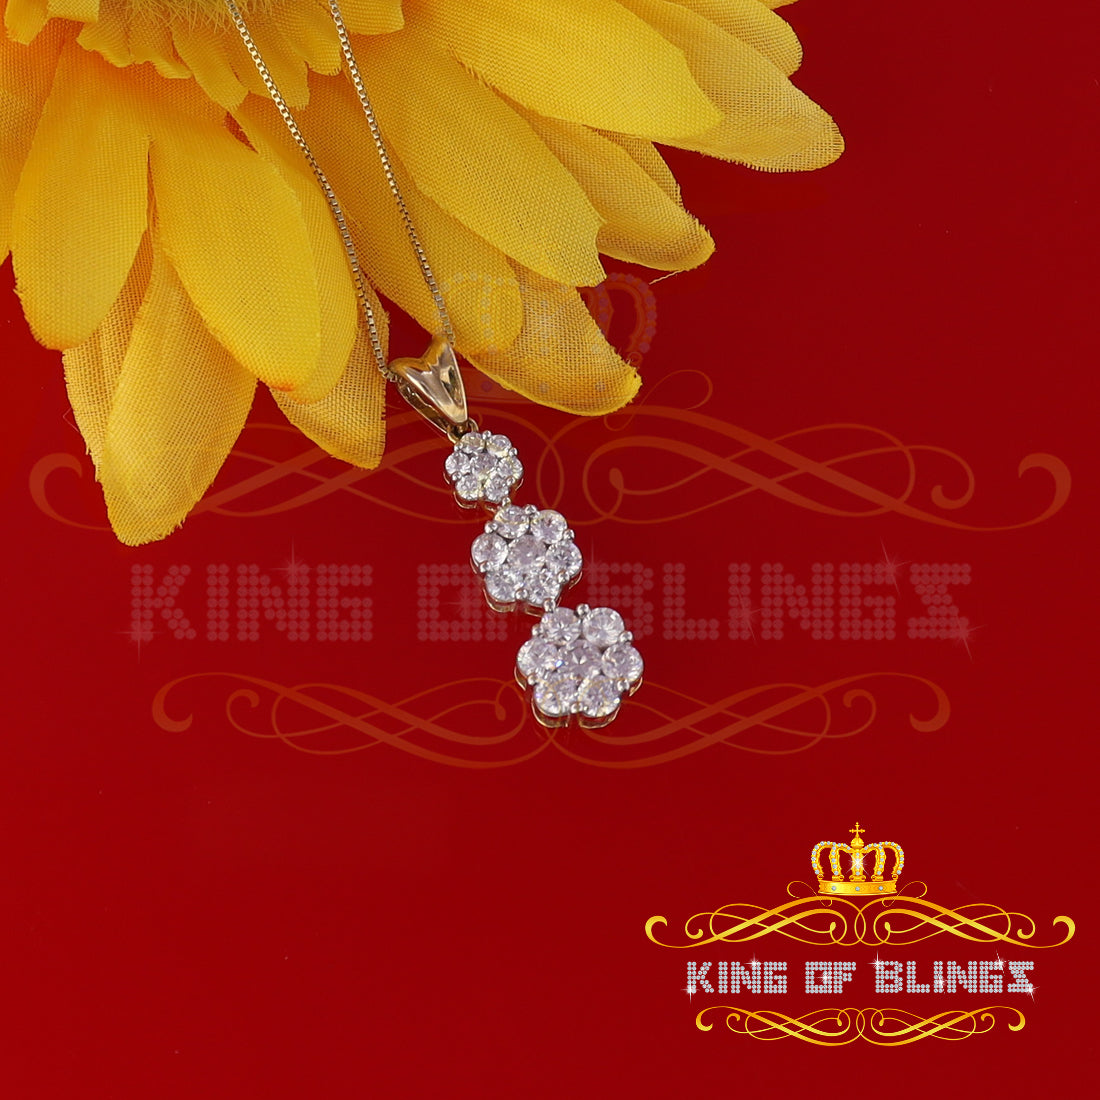 Yellow 925 past present future Sterling Silver Pendant 3.71ct Cubic Zirconia KING OF BLINGS